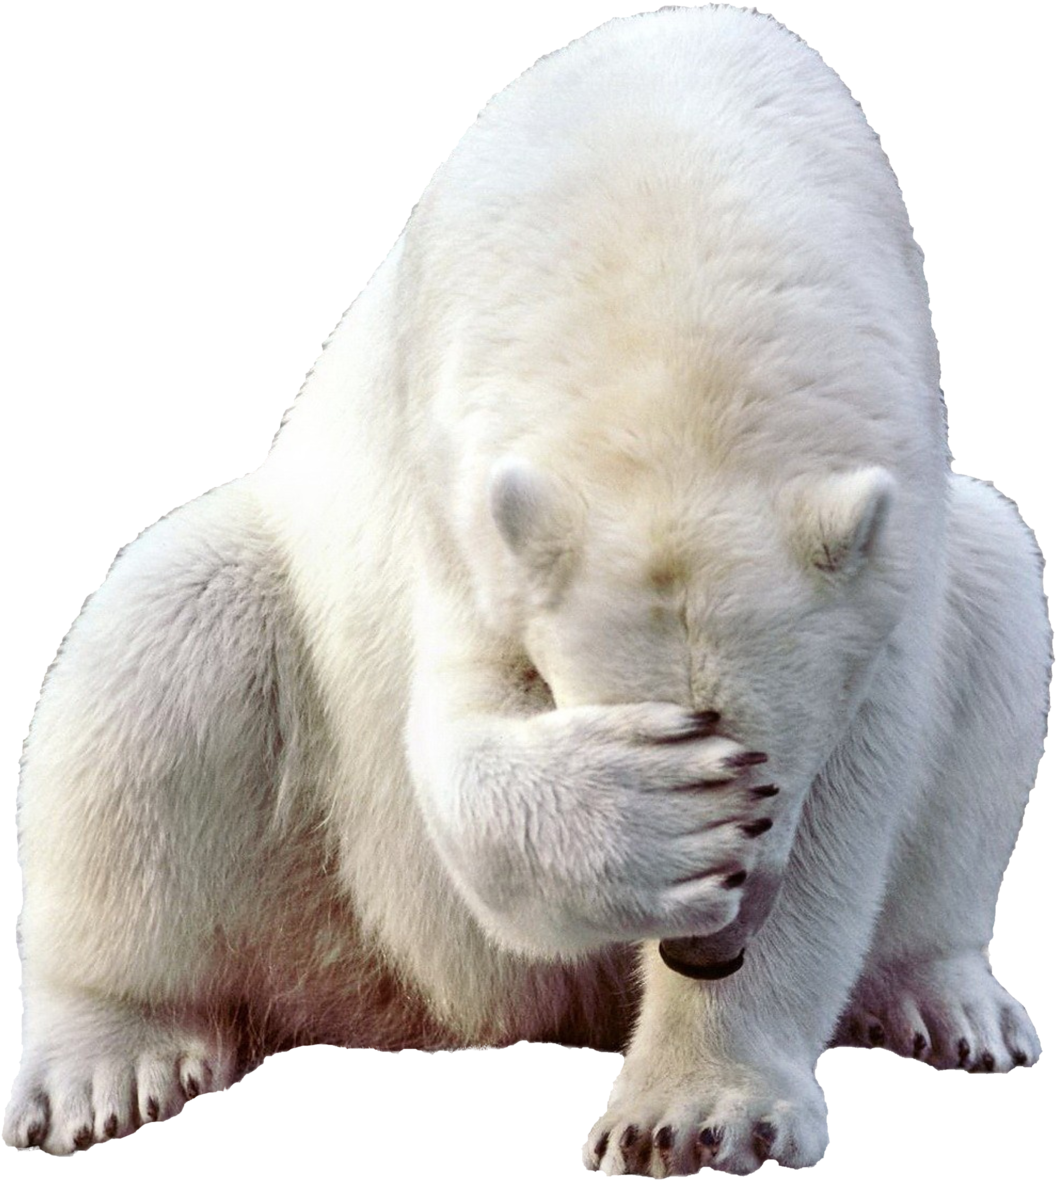 A Polar Bear With Its Hands Over Its Face